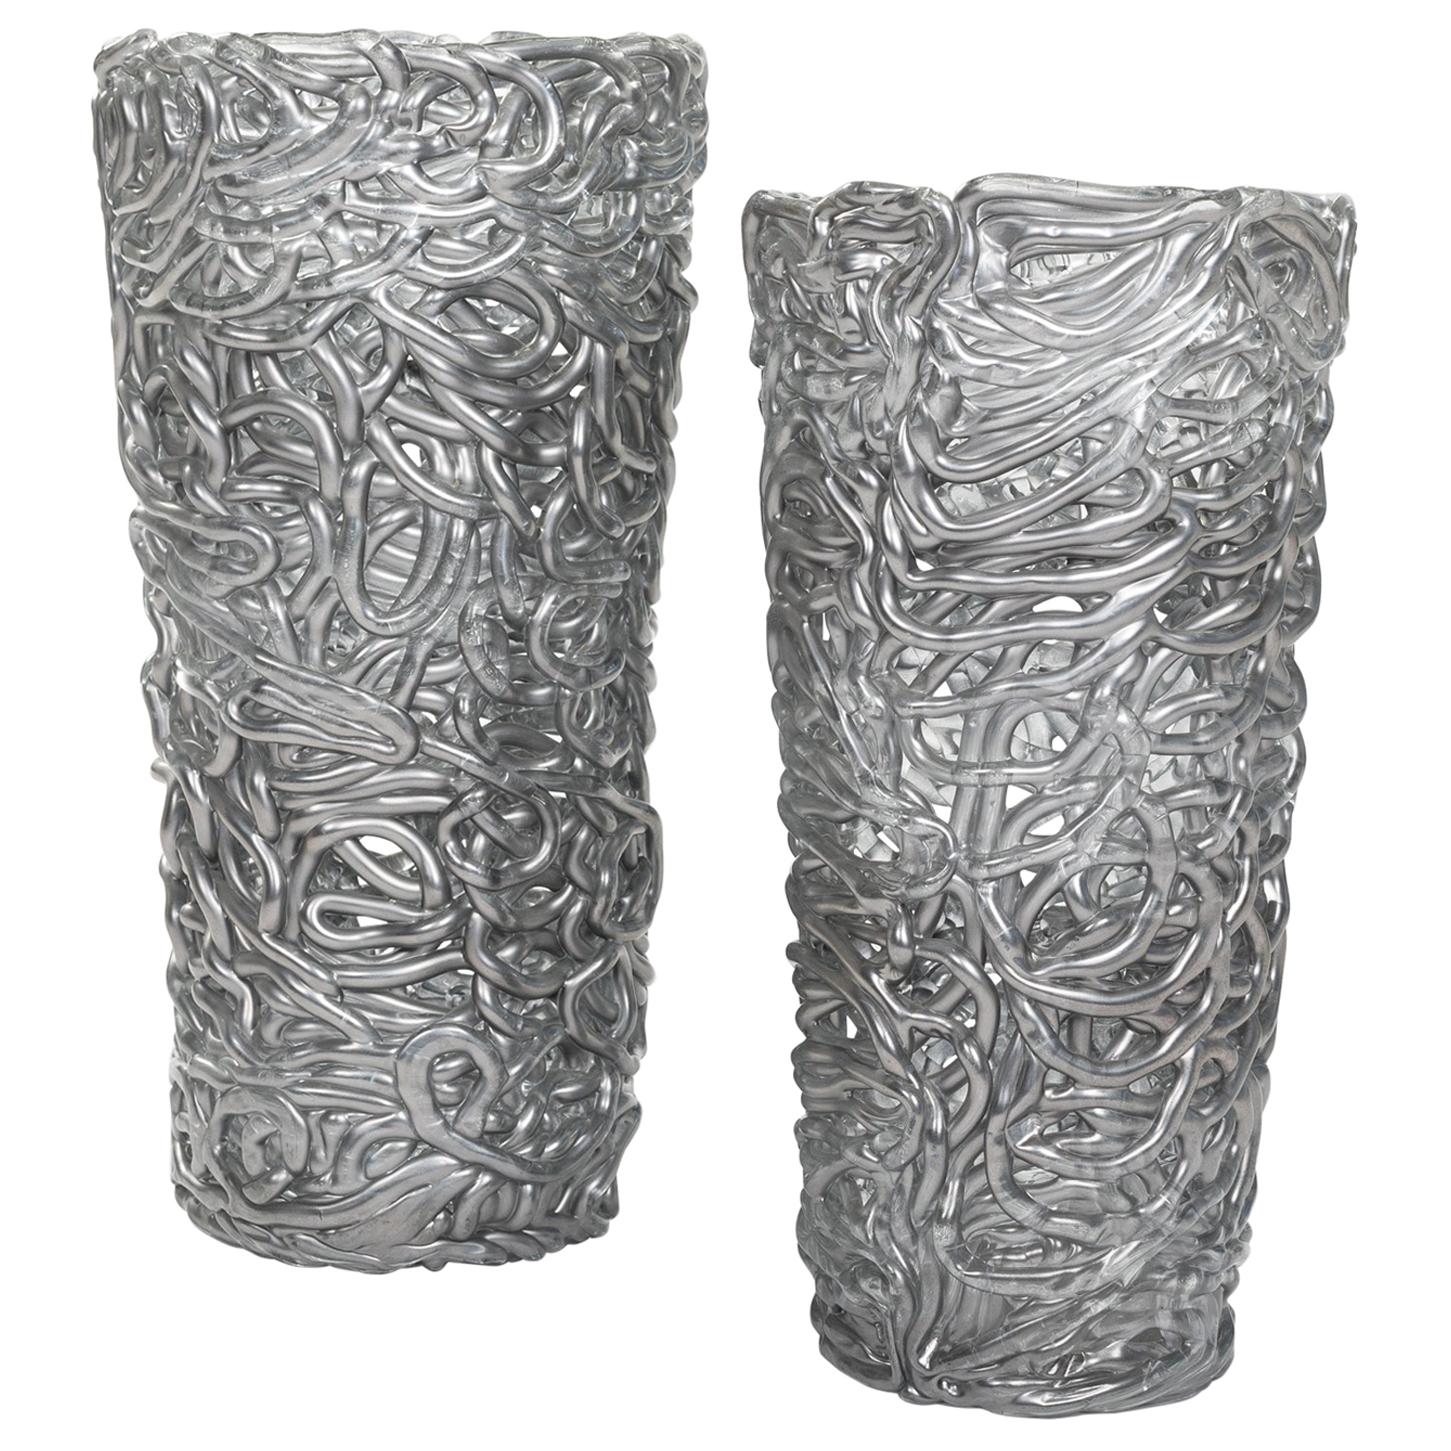 Pair of Midcentury Silver-Colored Murano Glass Vases out of Glass Veins